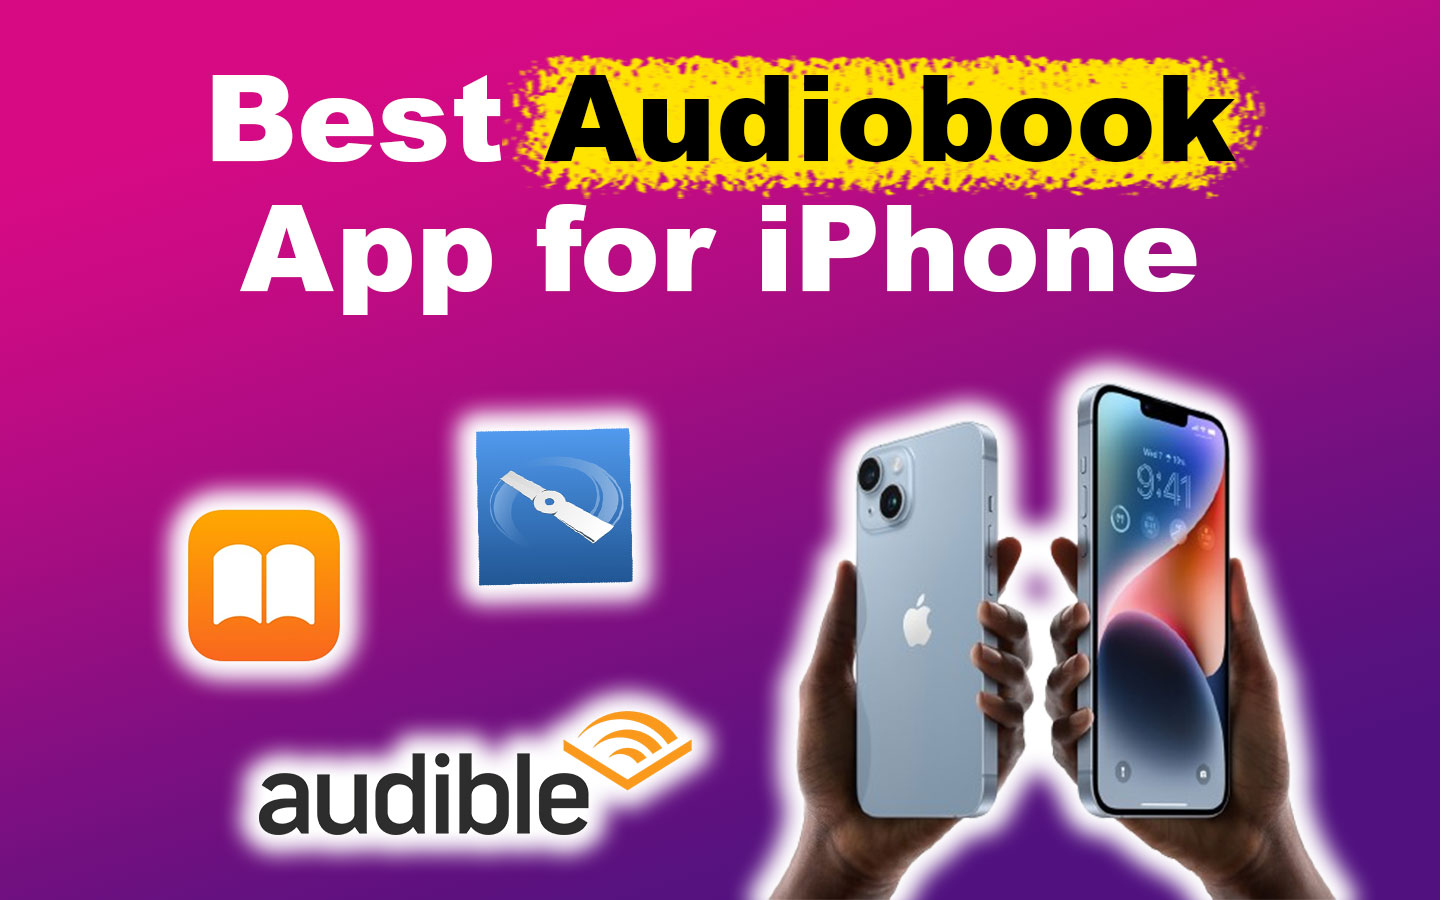 8 Best Audiobook Apps for iPhone Users [+ How to Use Them]